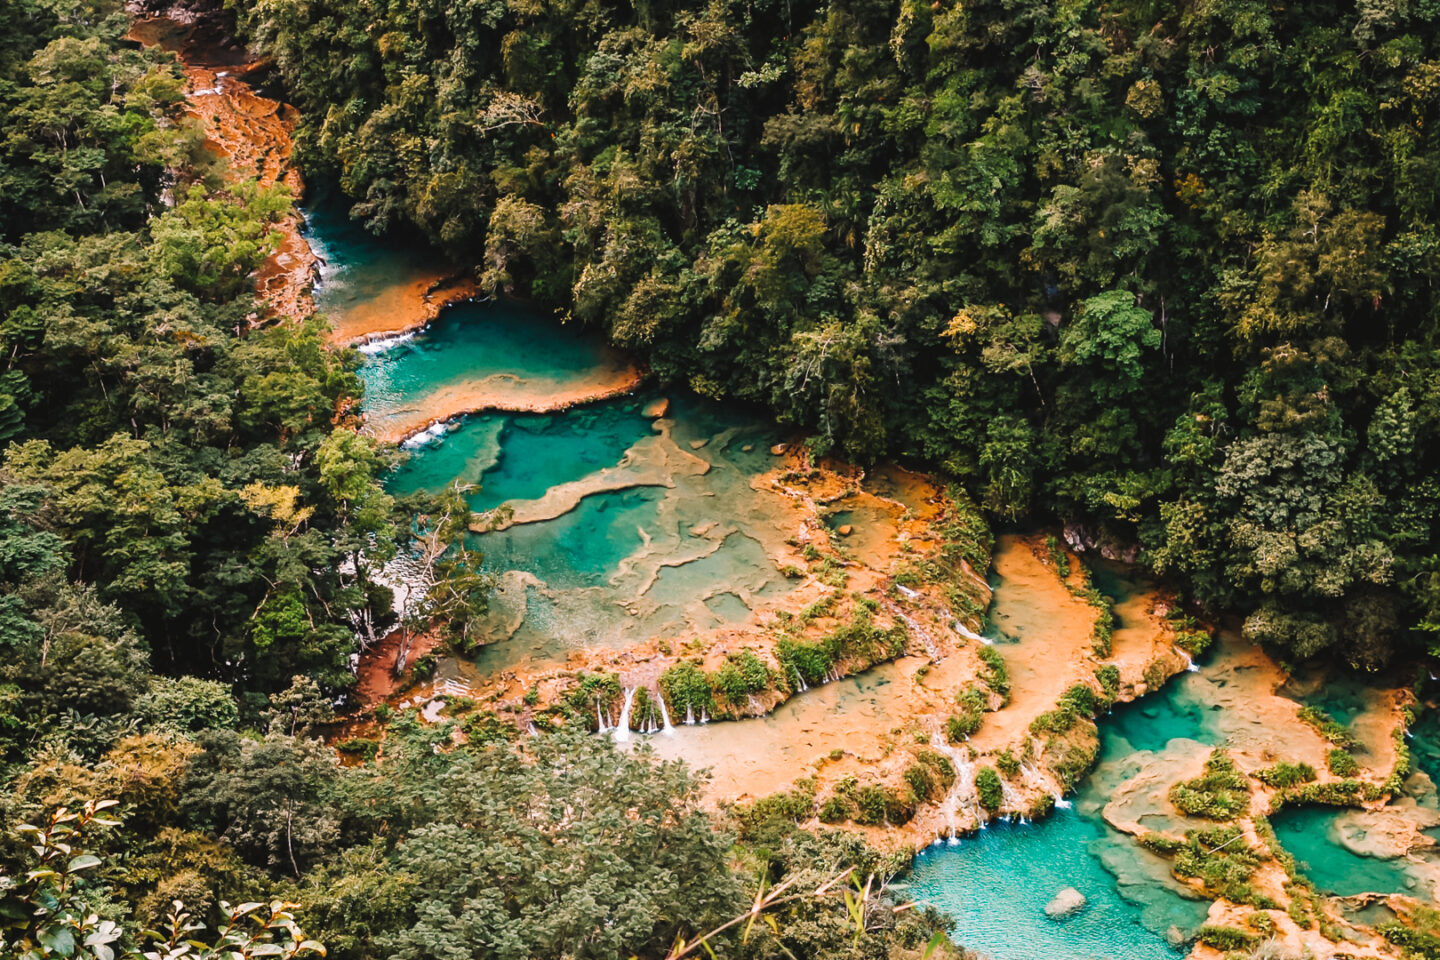 A view over the pools in Semuc Champey